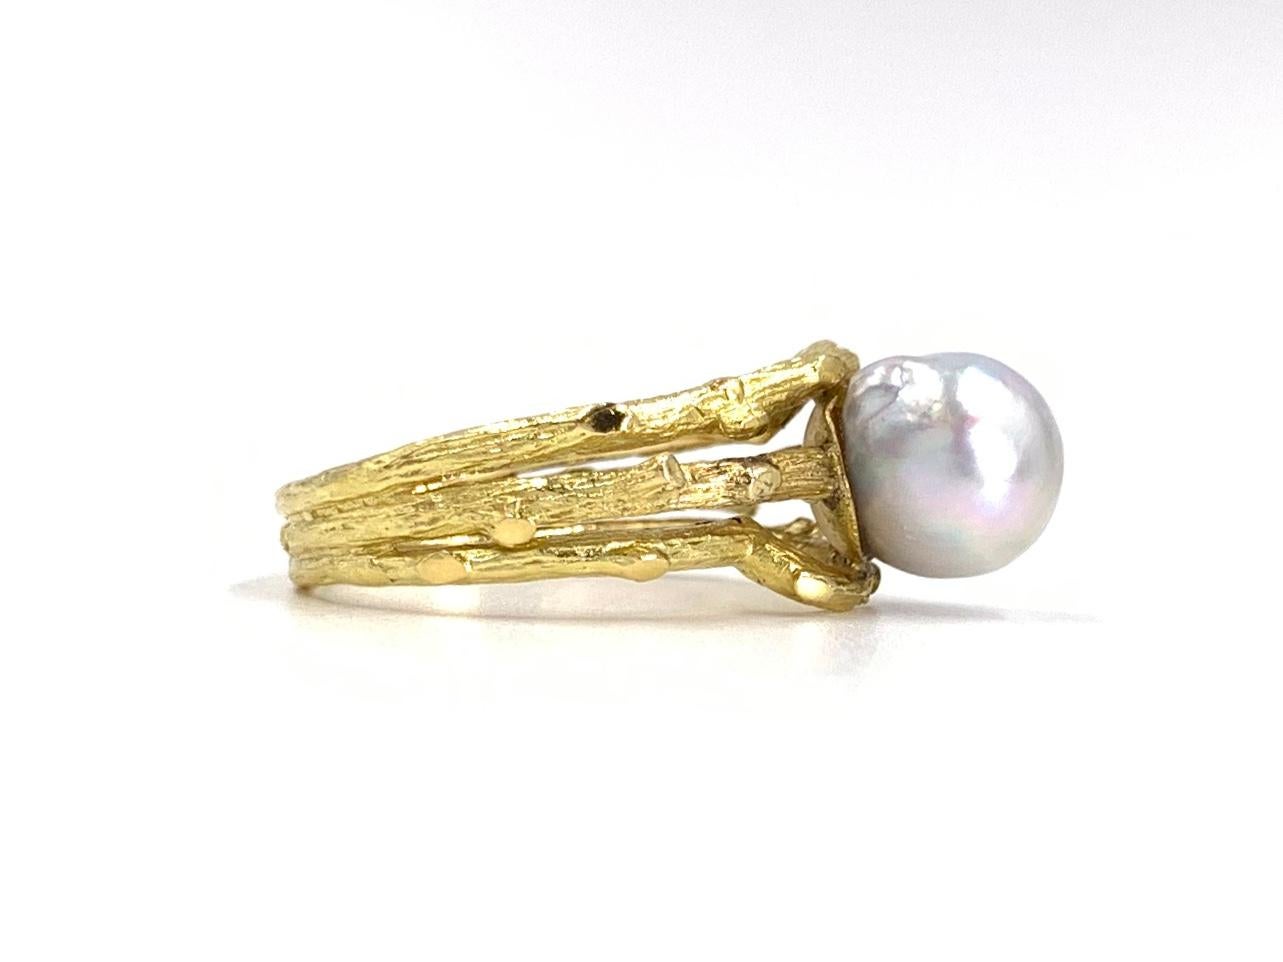 A unique and beautiful 18 karat yellow gold organic branch design ring featuring a single 8.5mm cultured pearl with an iridescent lilac-silver hue. Open branch shank is hand carved with exquisite detail. Width of ring measures 10mm at widest point